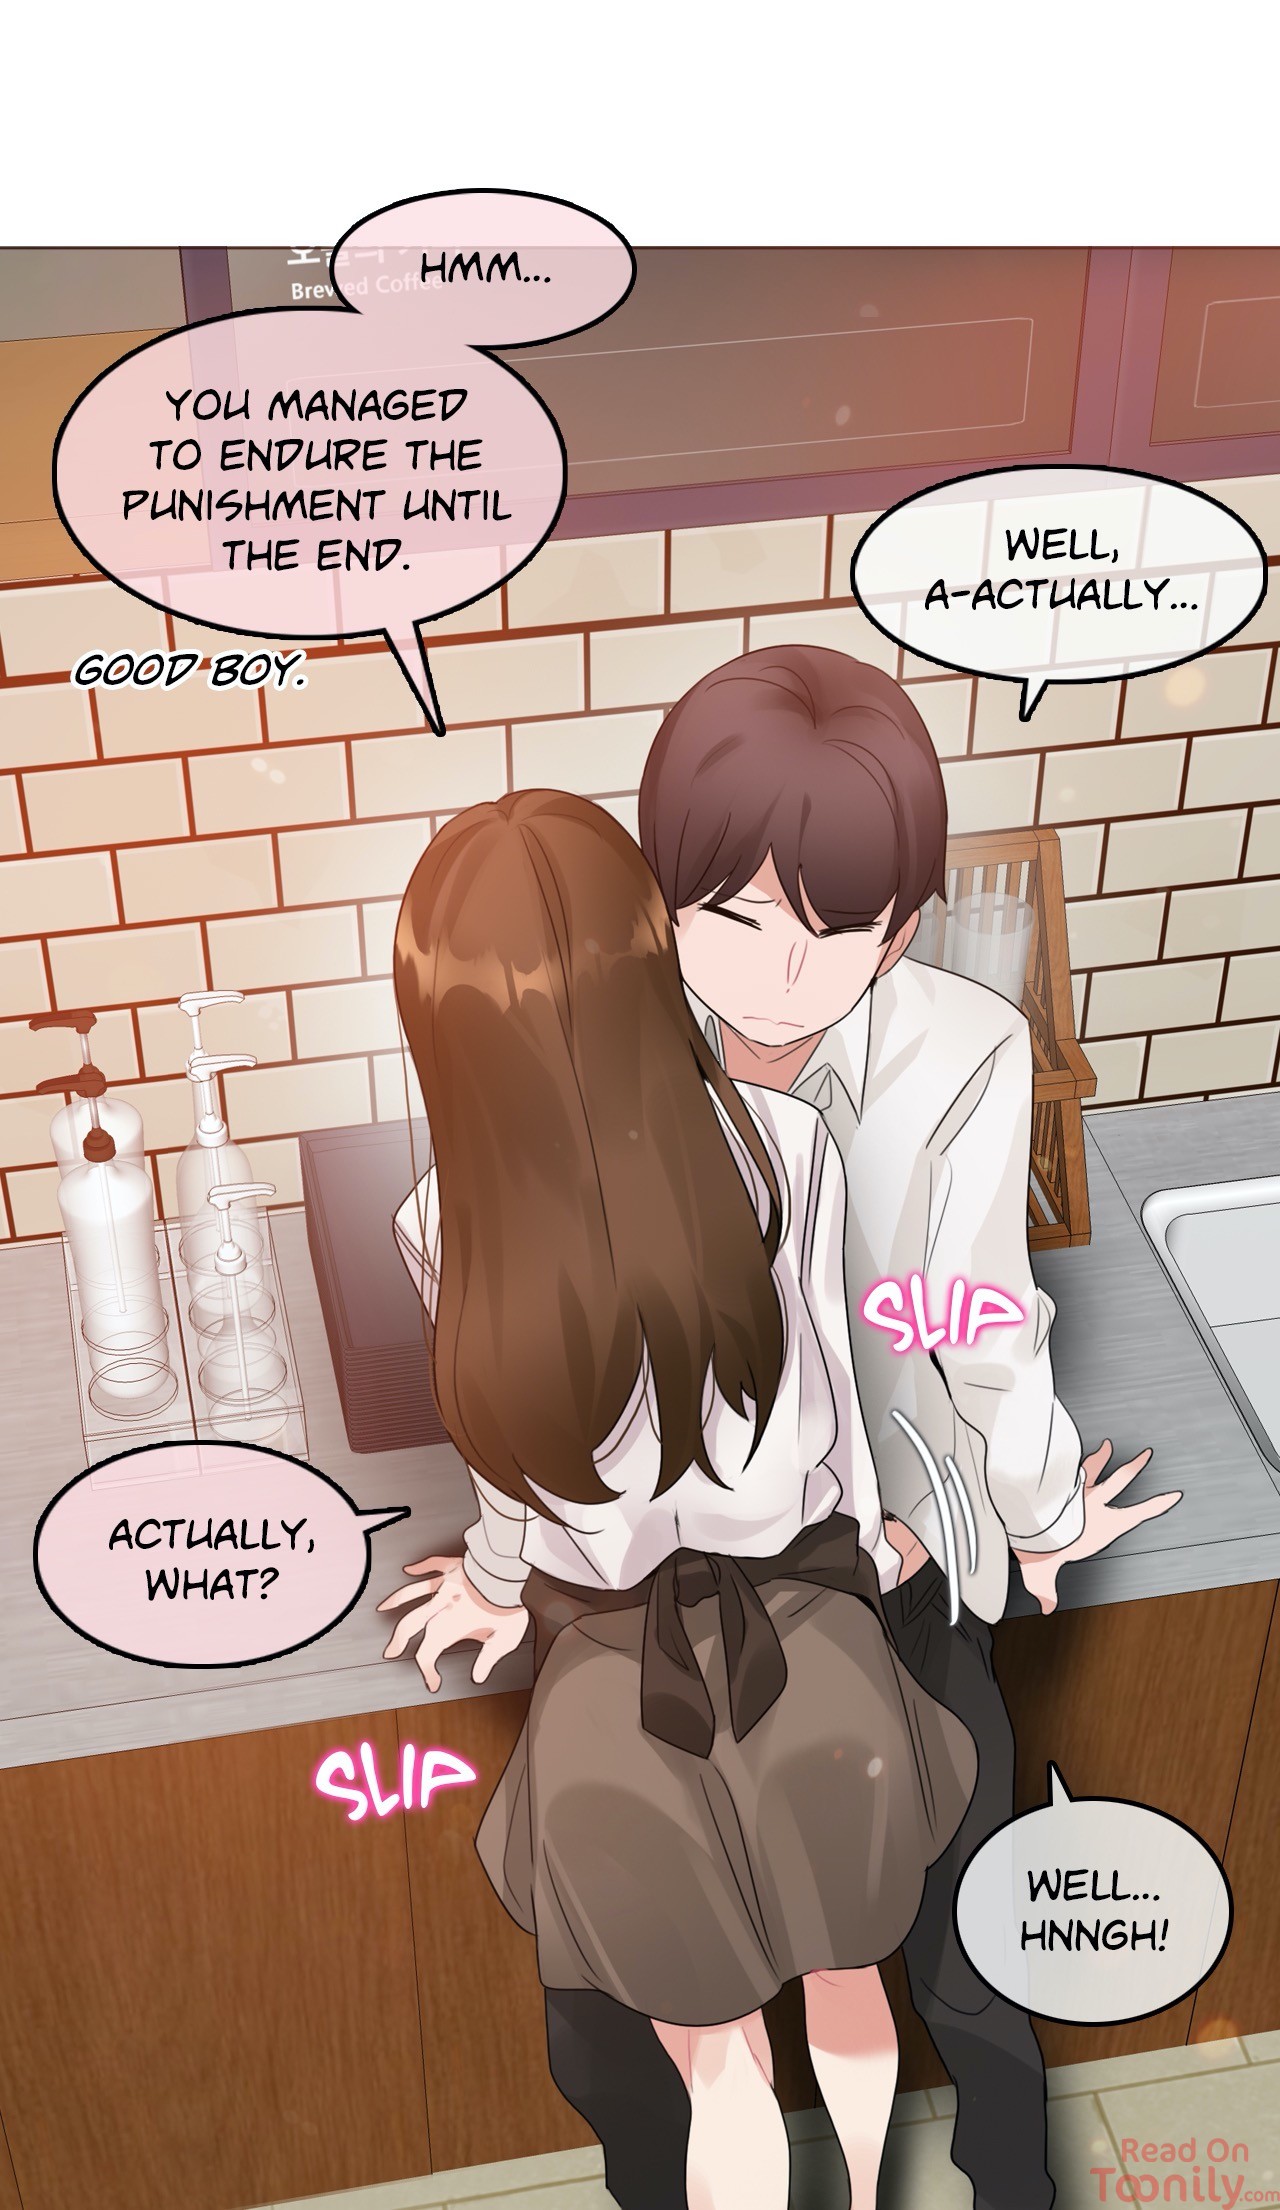 A Pervert’s Daily Life image